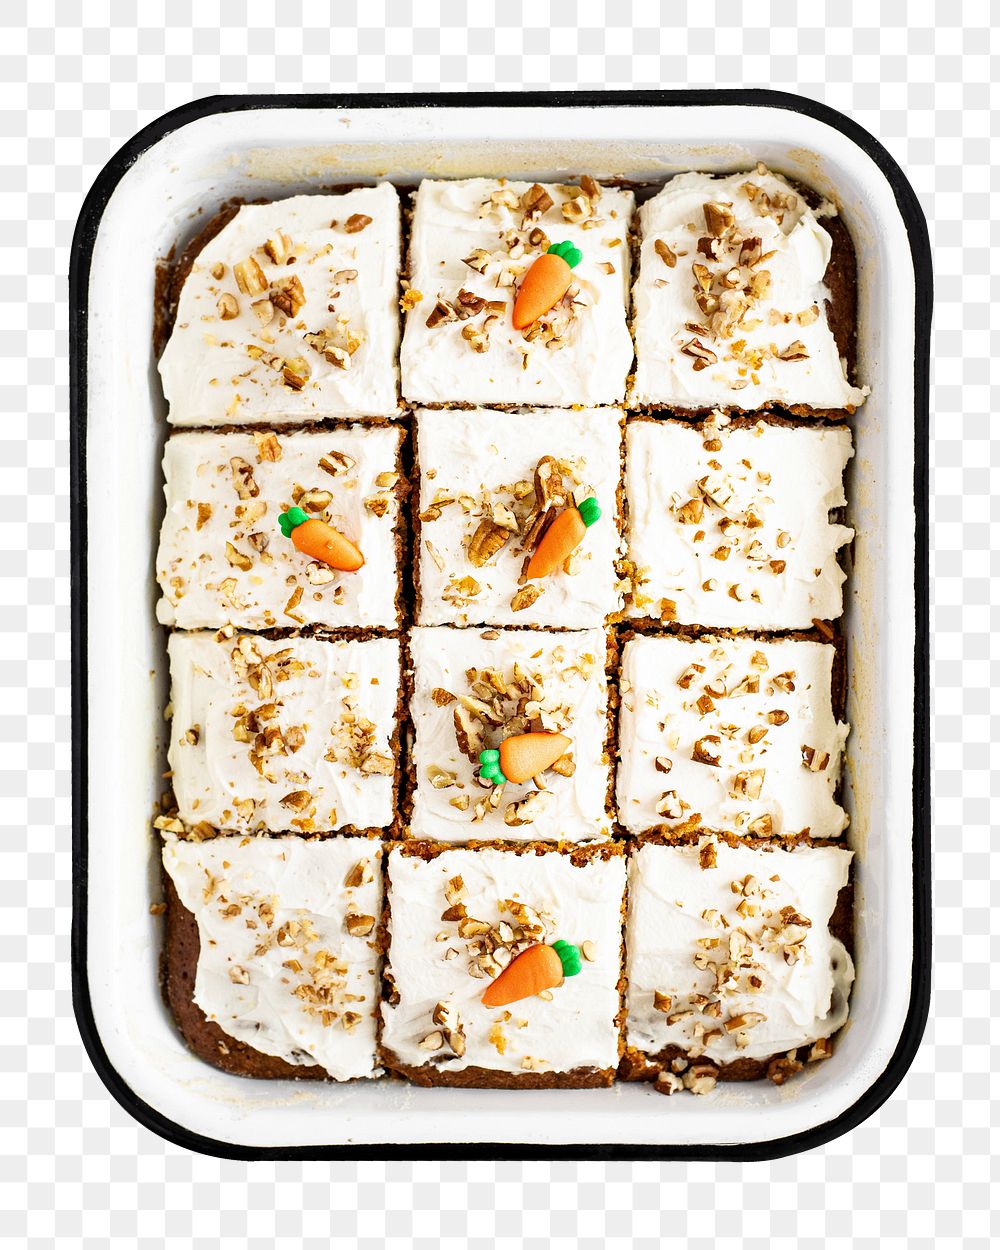 Carrot cake png, transparent background